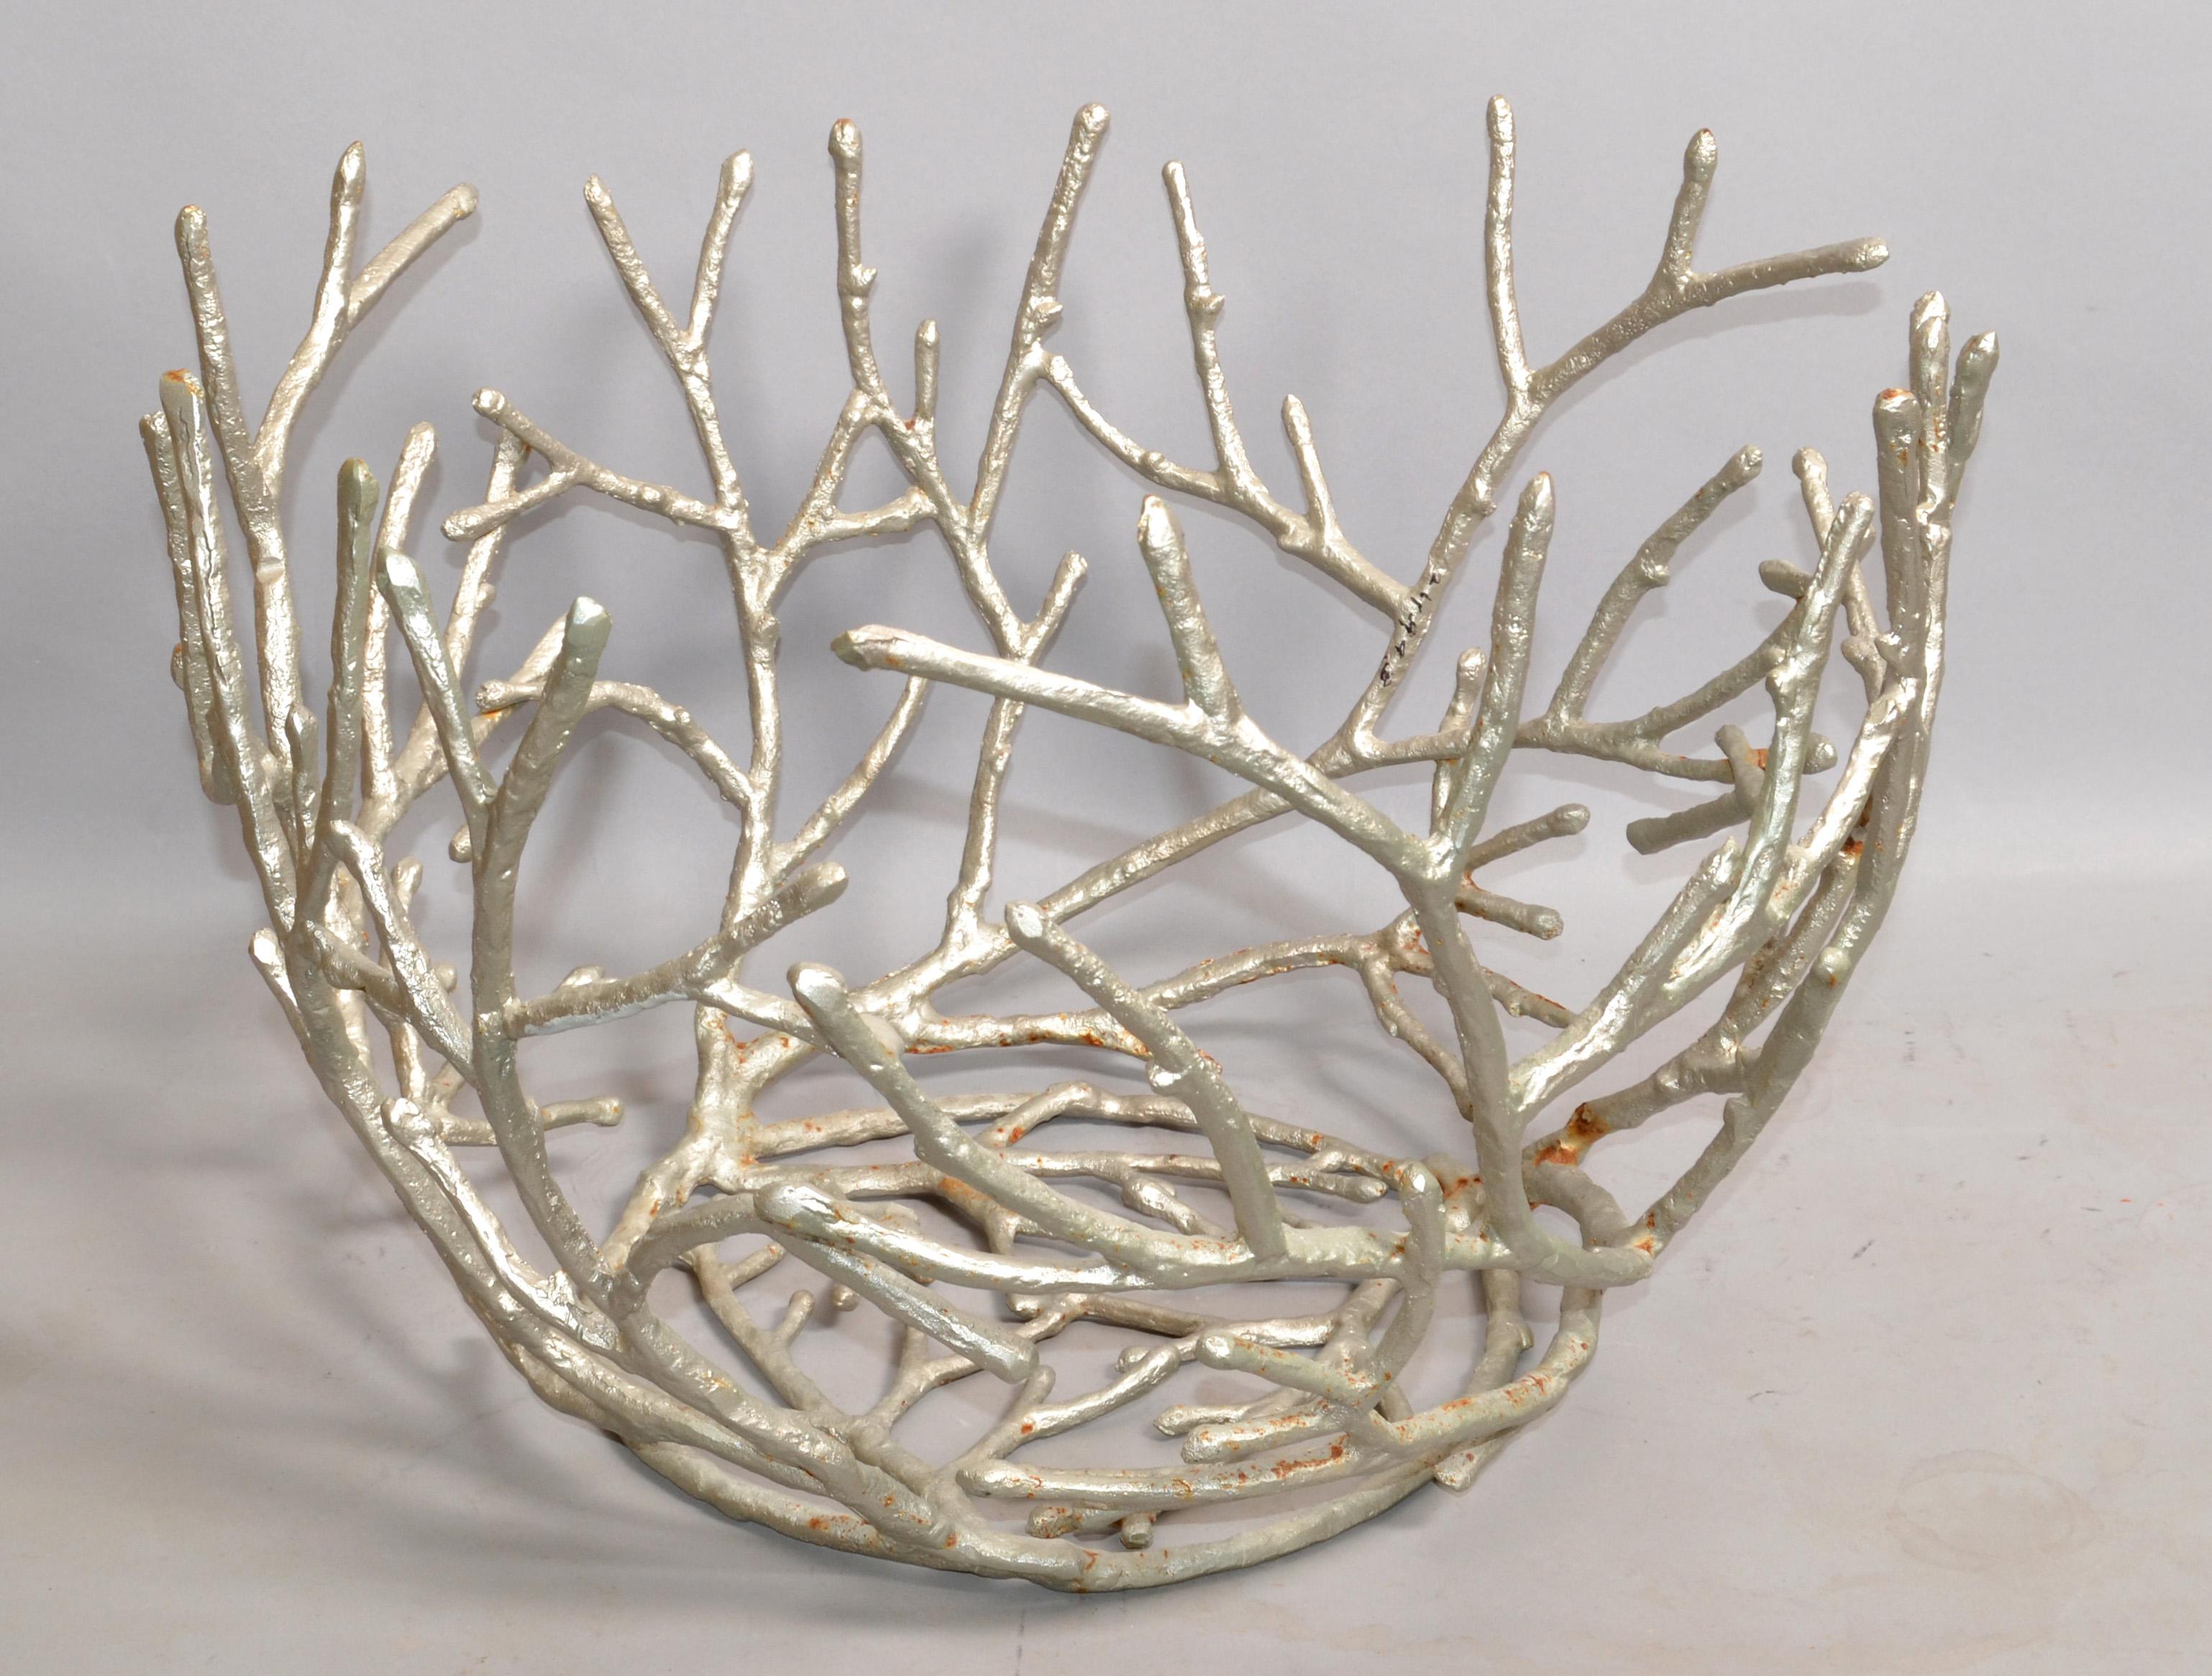 1970s, Sculptural Organic Coral Shaped Distressed Silver Finish Aluminum Planter For Sale 6